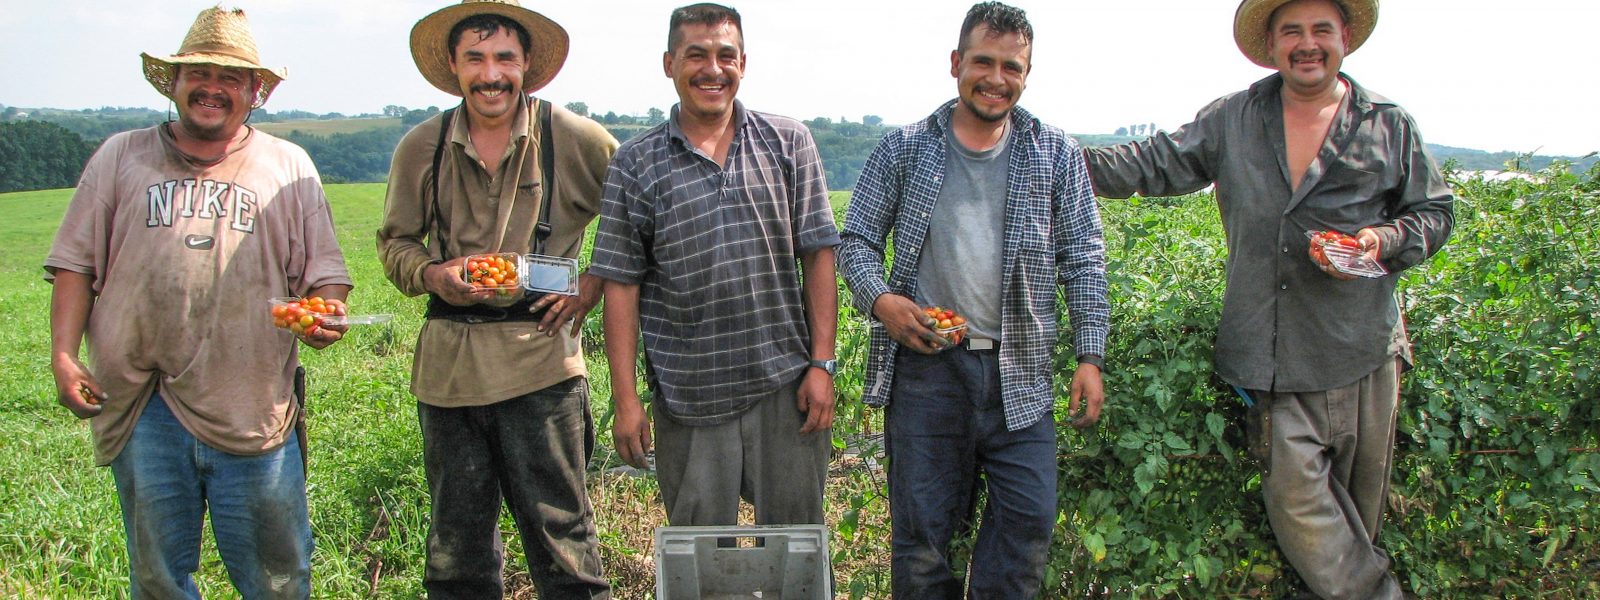 A group of farmworkers standing in a field smiling